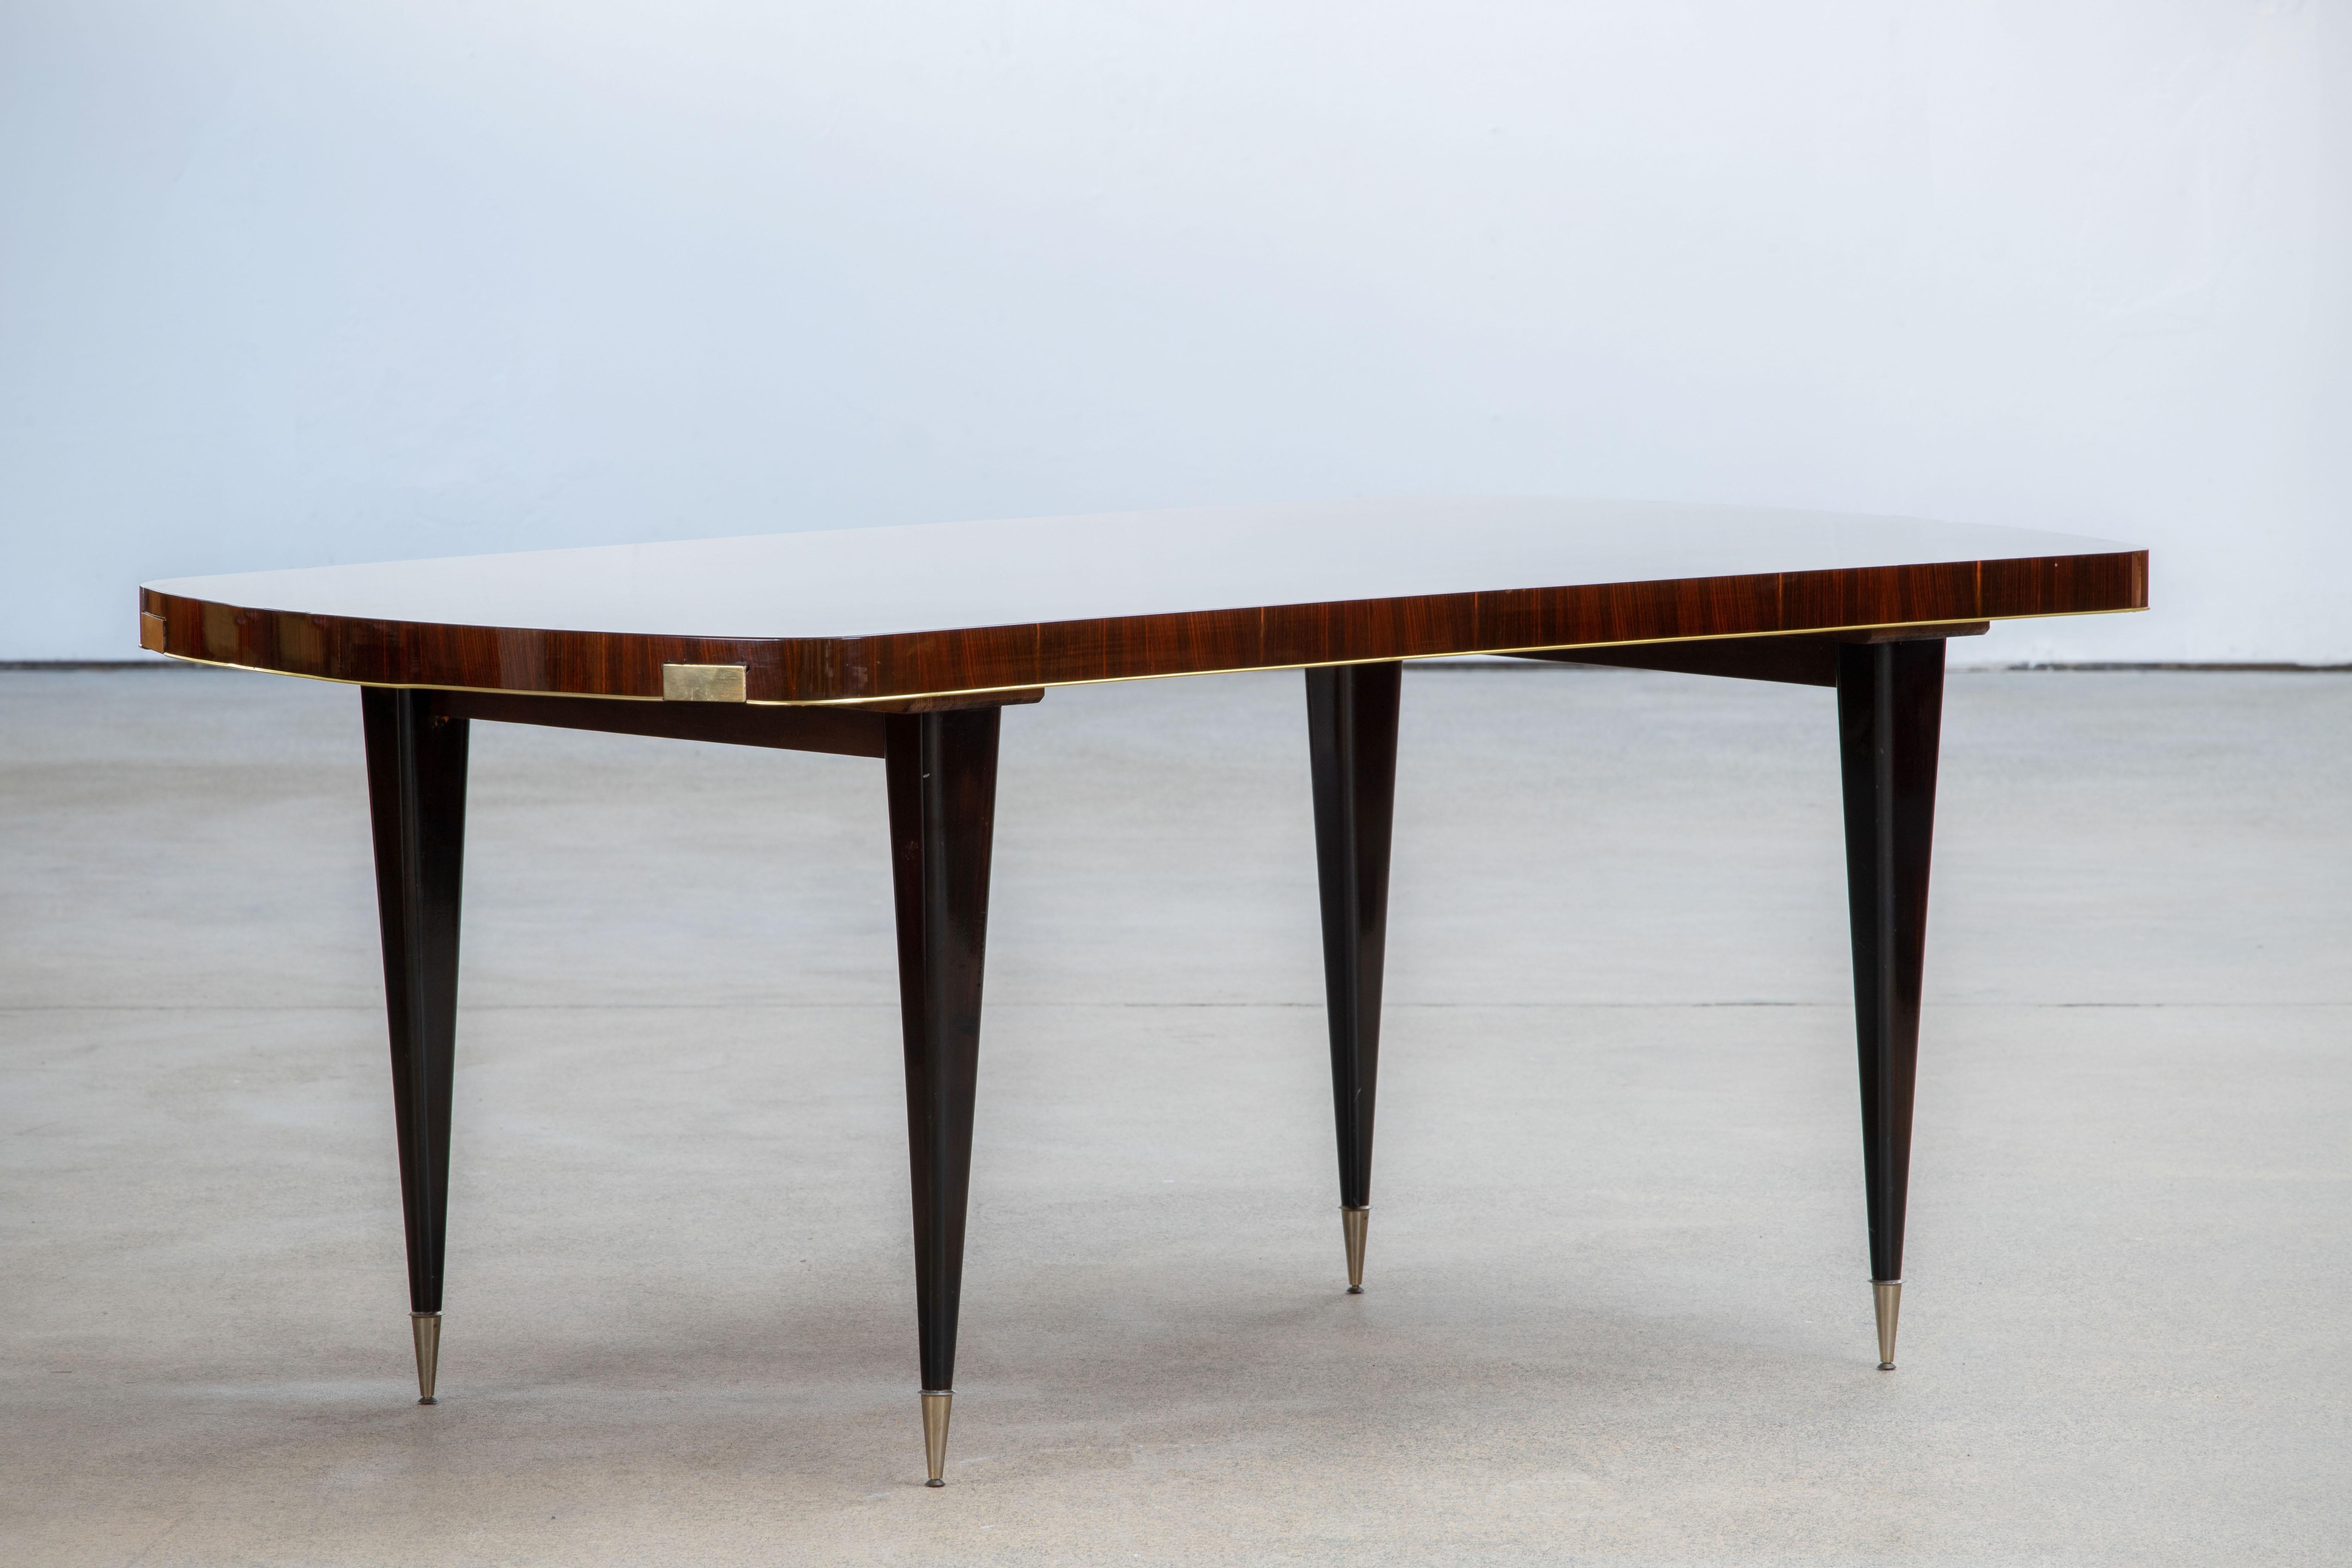 French Art Deco Brutalist Table, Macassar, 1940s For Sale 4